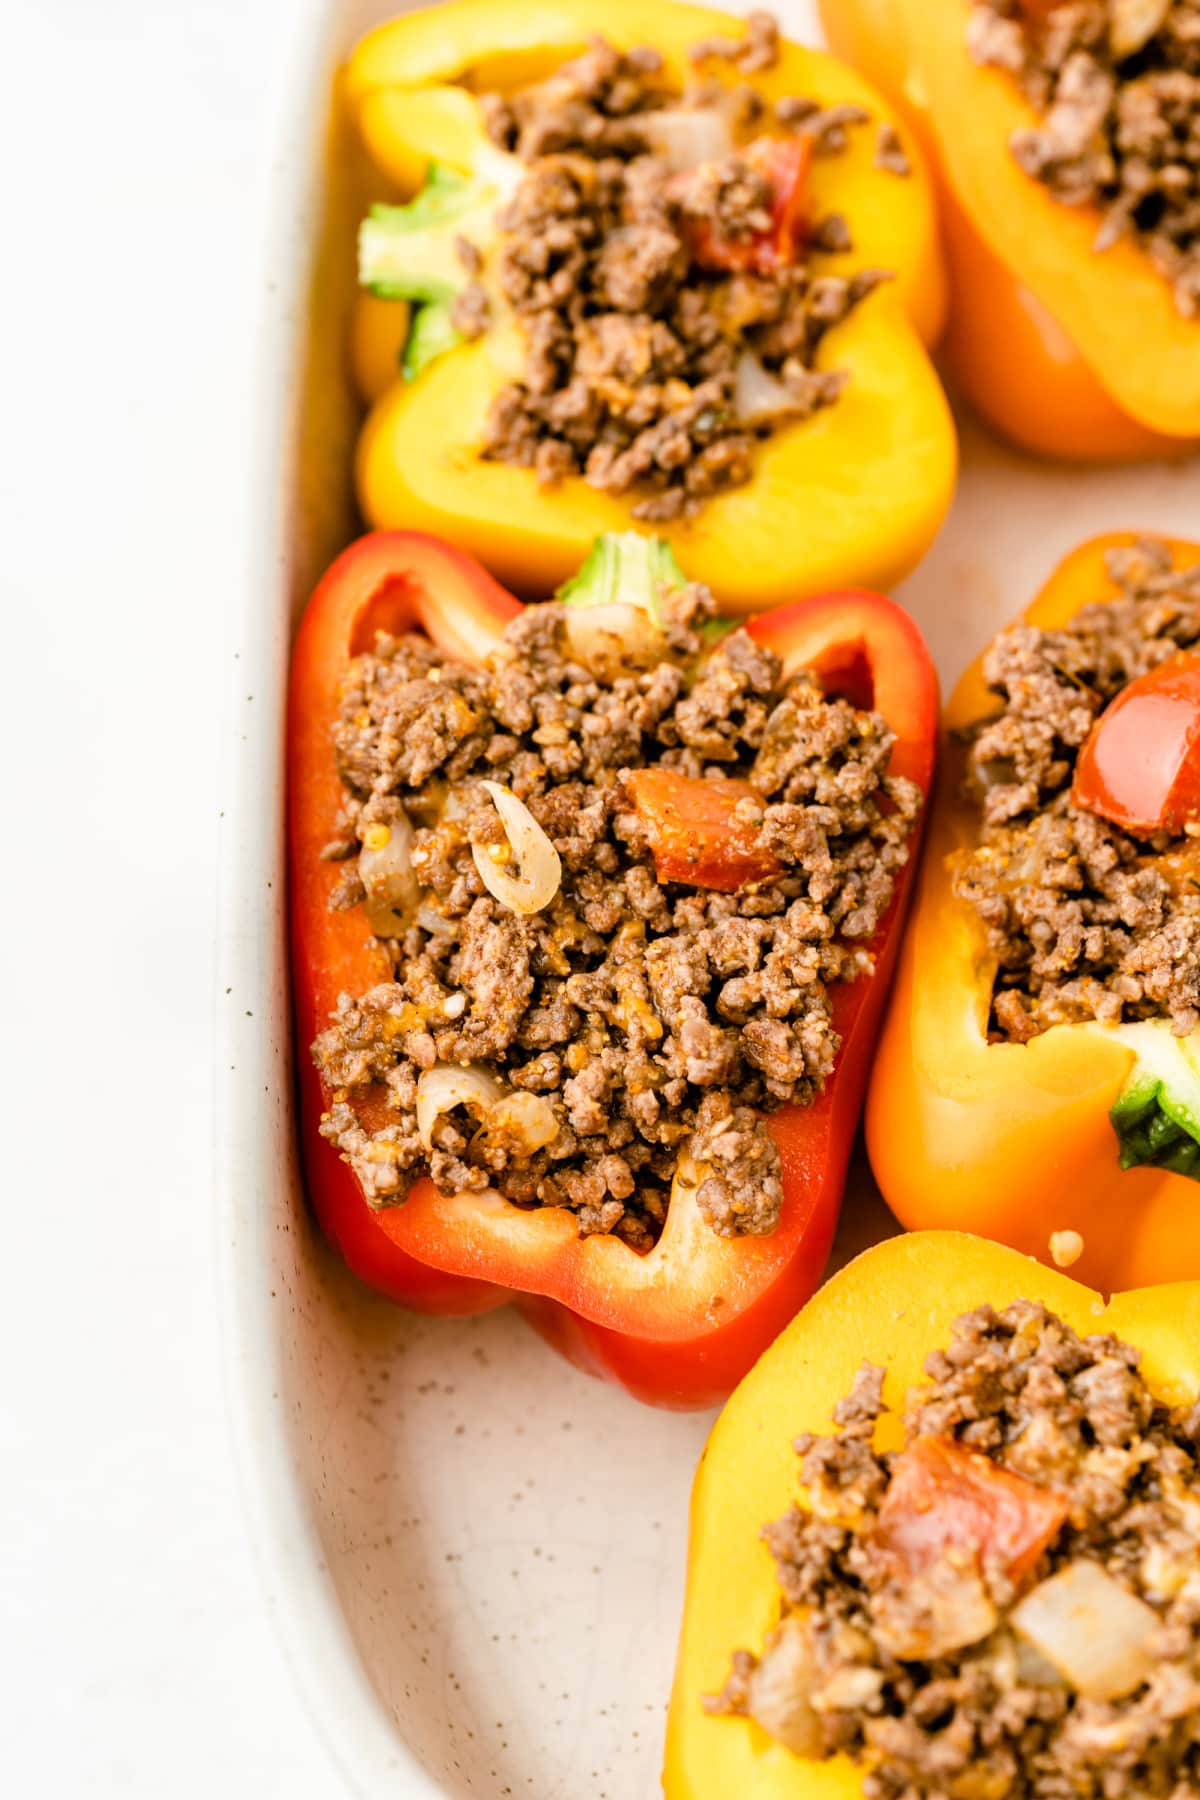 Red bell pepper with taco filling